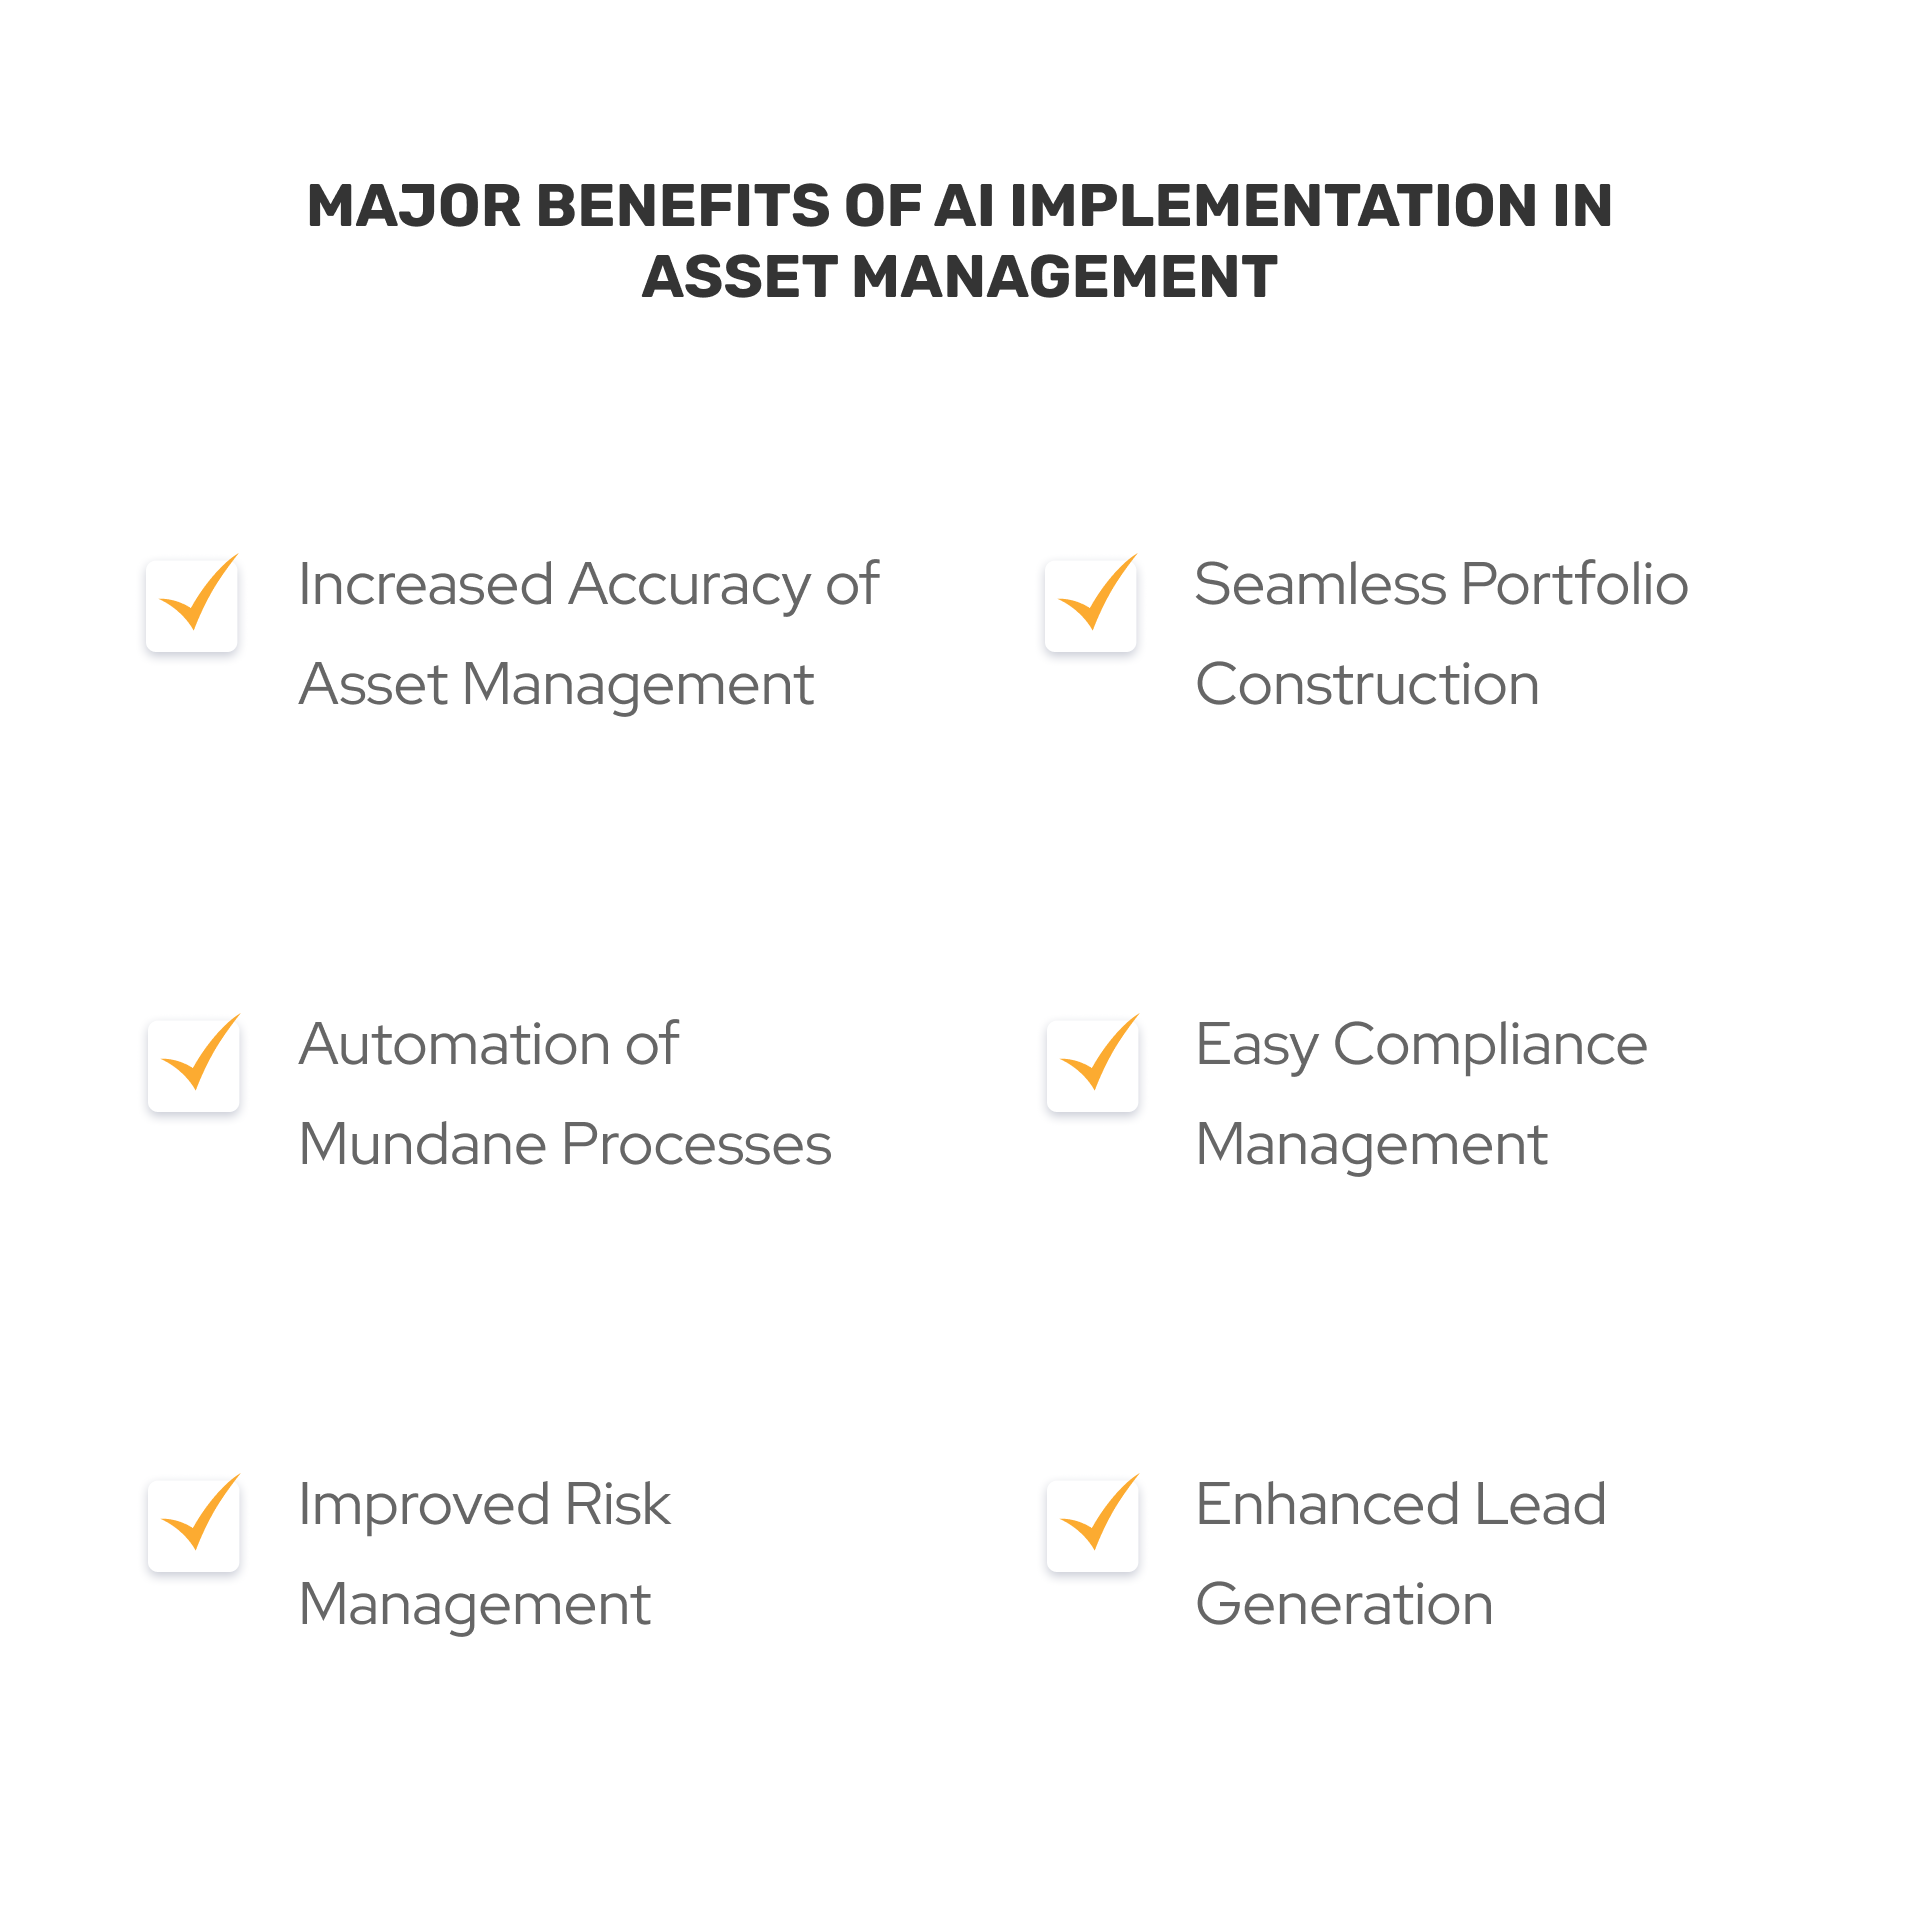 Artificial Intelligence brings the asset and wealth management sector multiple benefits in terms of improved risk management and easy compliance management.